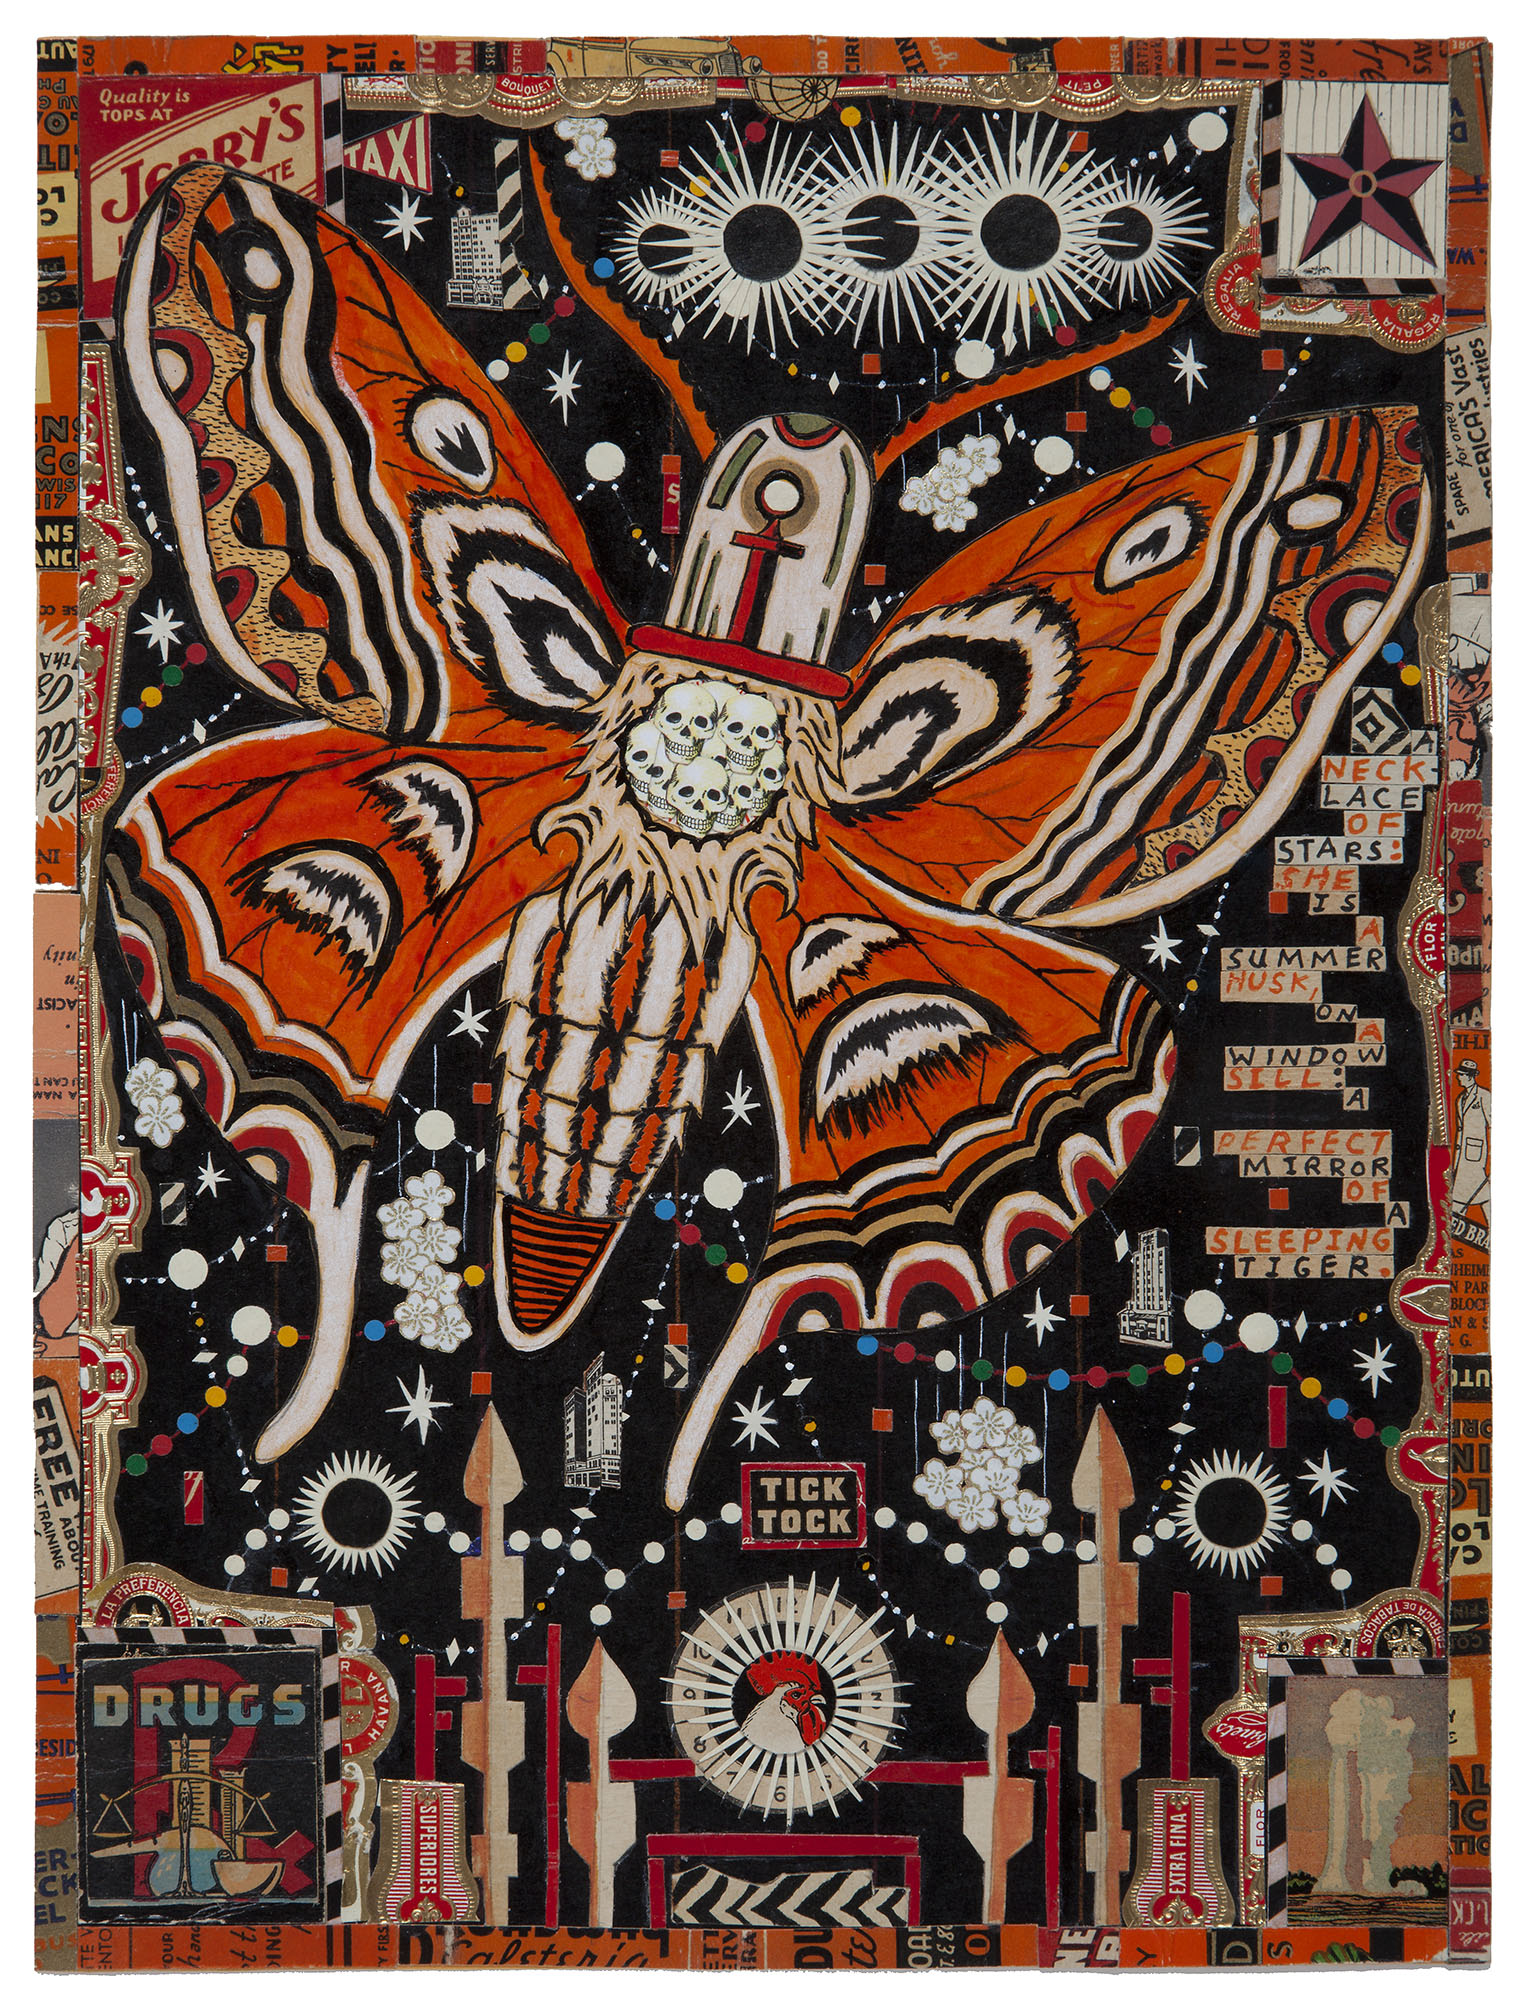 Tony Fitzpatrick, The Winter Tiger, 2010. Graphite, ink, pigment, and found materials. Collection of DePaul Art Museum, Art Acquisition Endowment, 2010.70